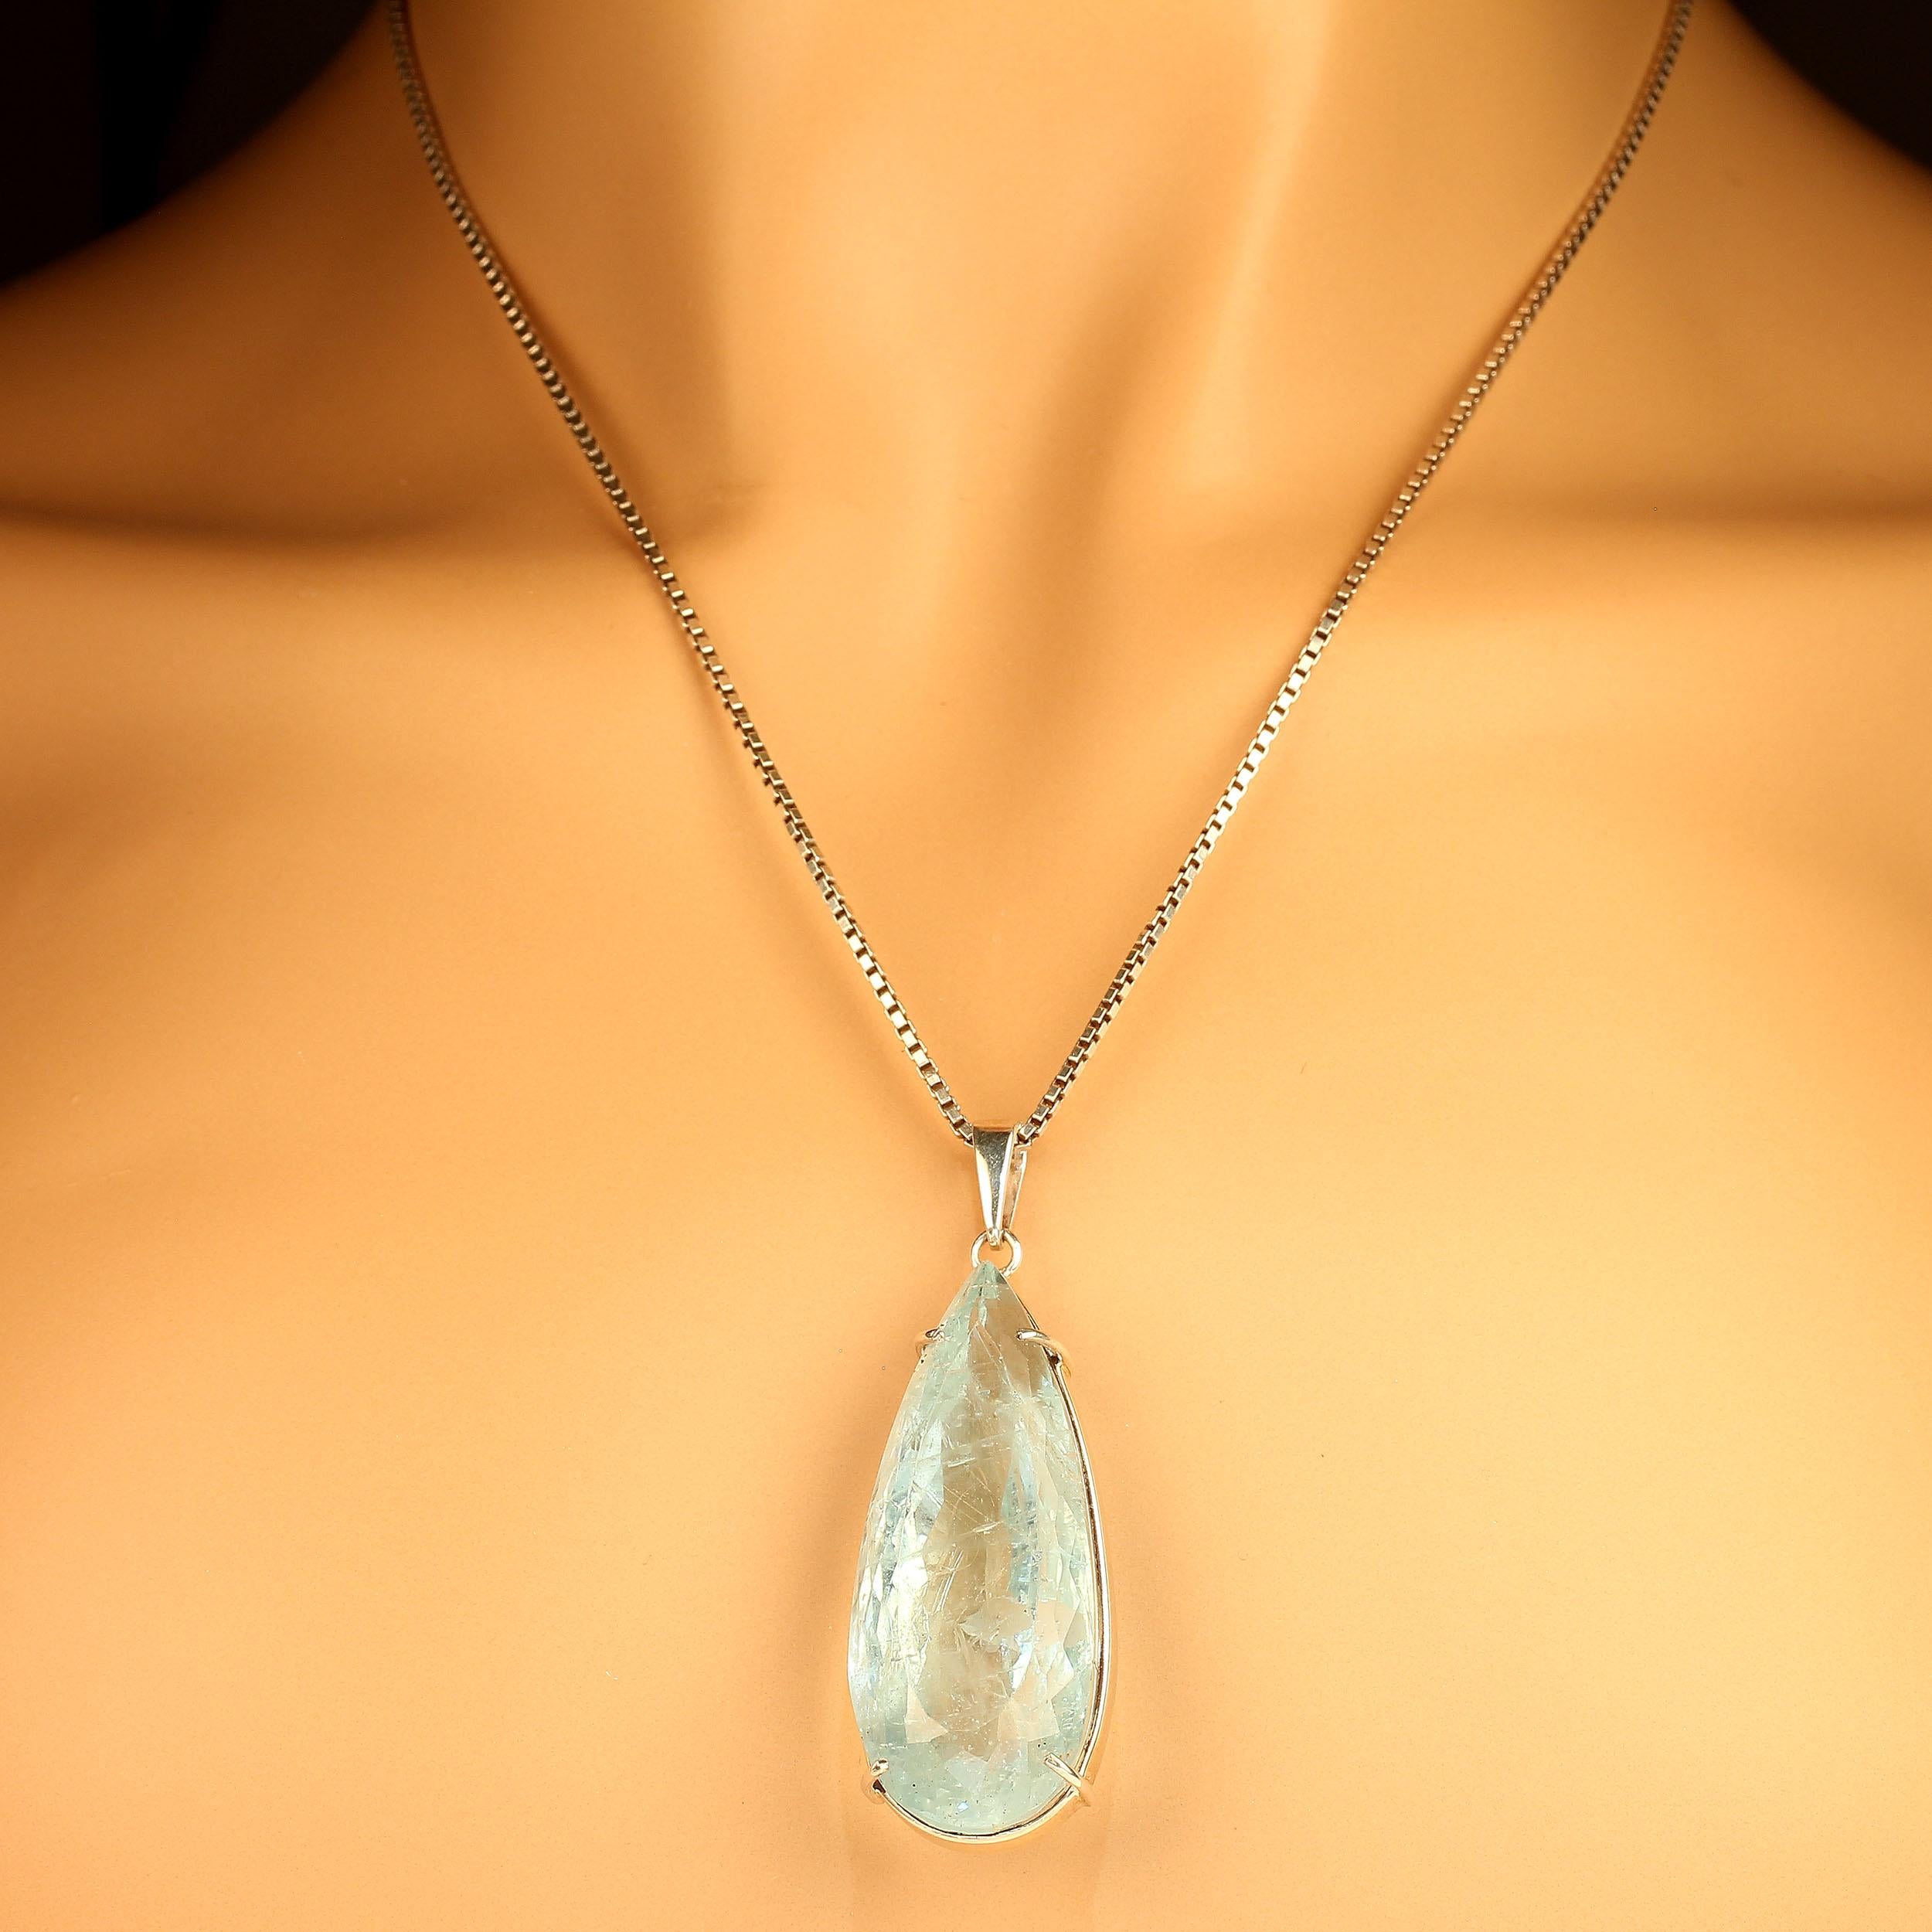 Rare long teardrop Aquamarine pendant for all you March babies. This bespoke pendant is an elegant example of Aquamarine beauty. At 90 carats this stunning Aquamarine is a rare find. And it is set in handmade Sterling Silver.  It is a lovely shade